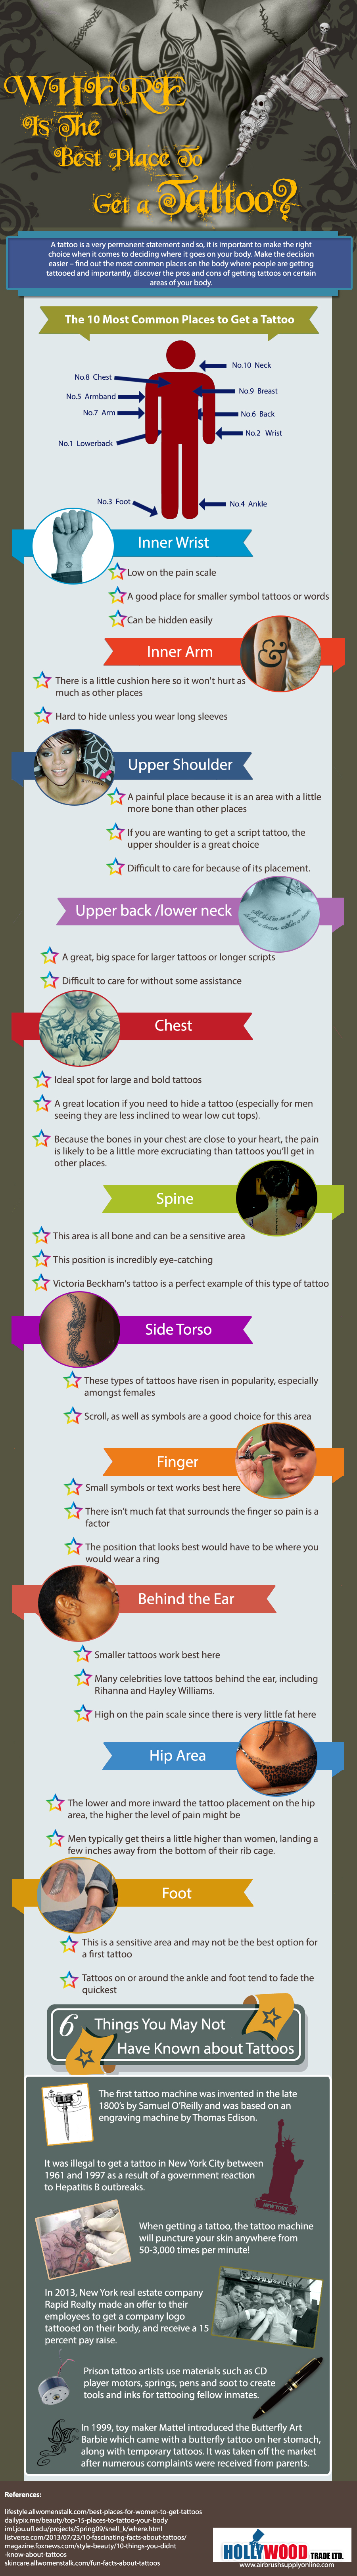 10 Most Common Places to Get a Tattoo